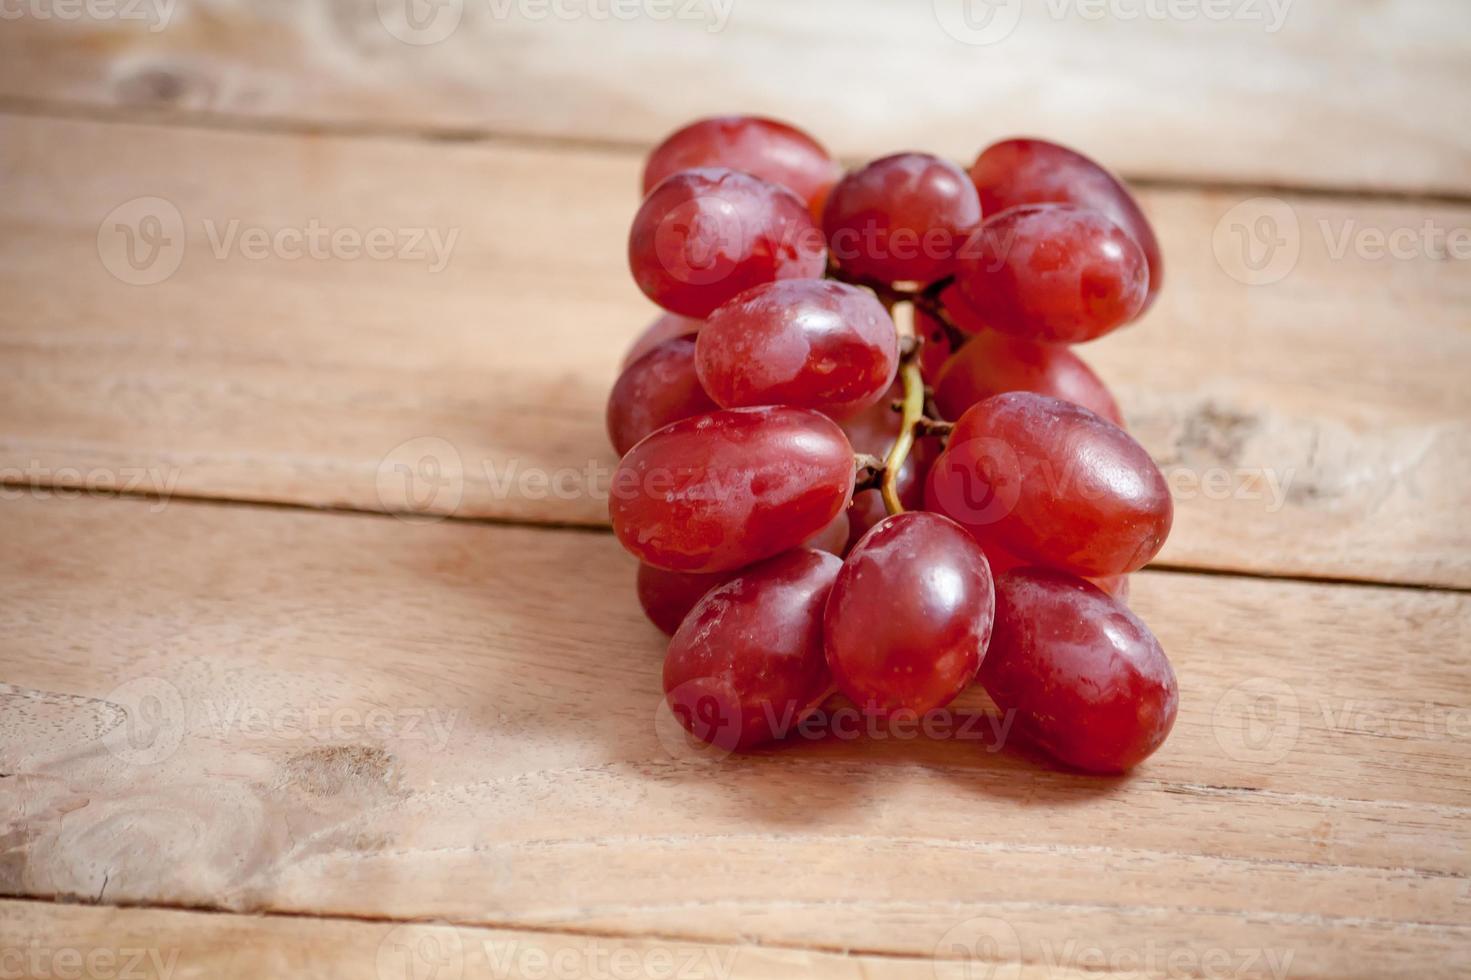 Grapes on a wooden table photo